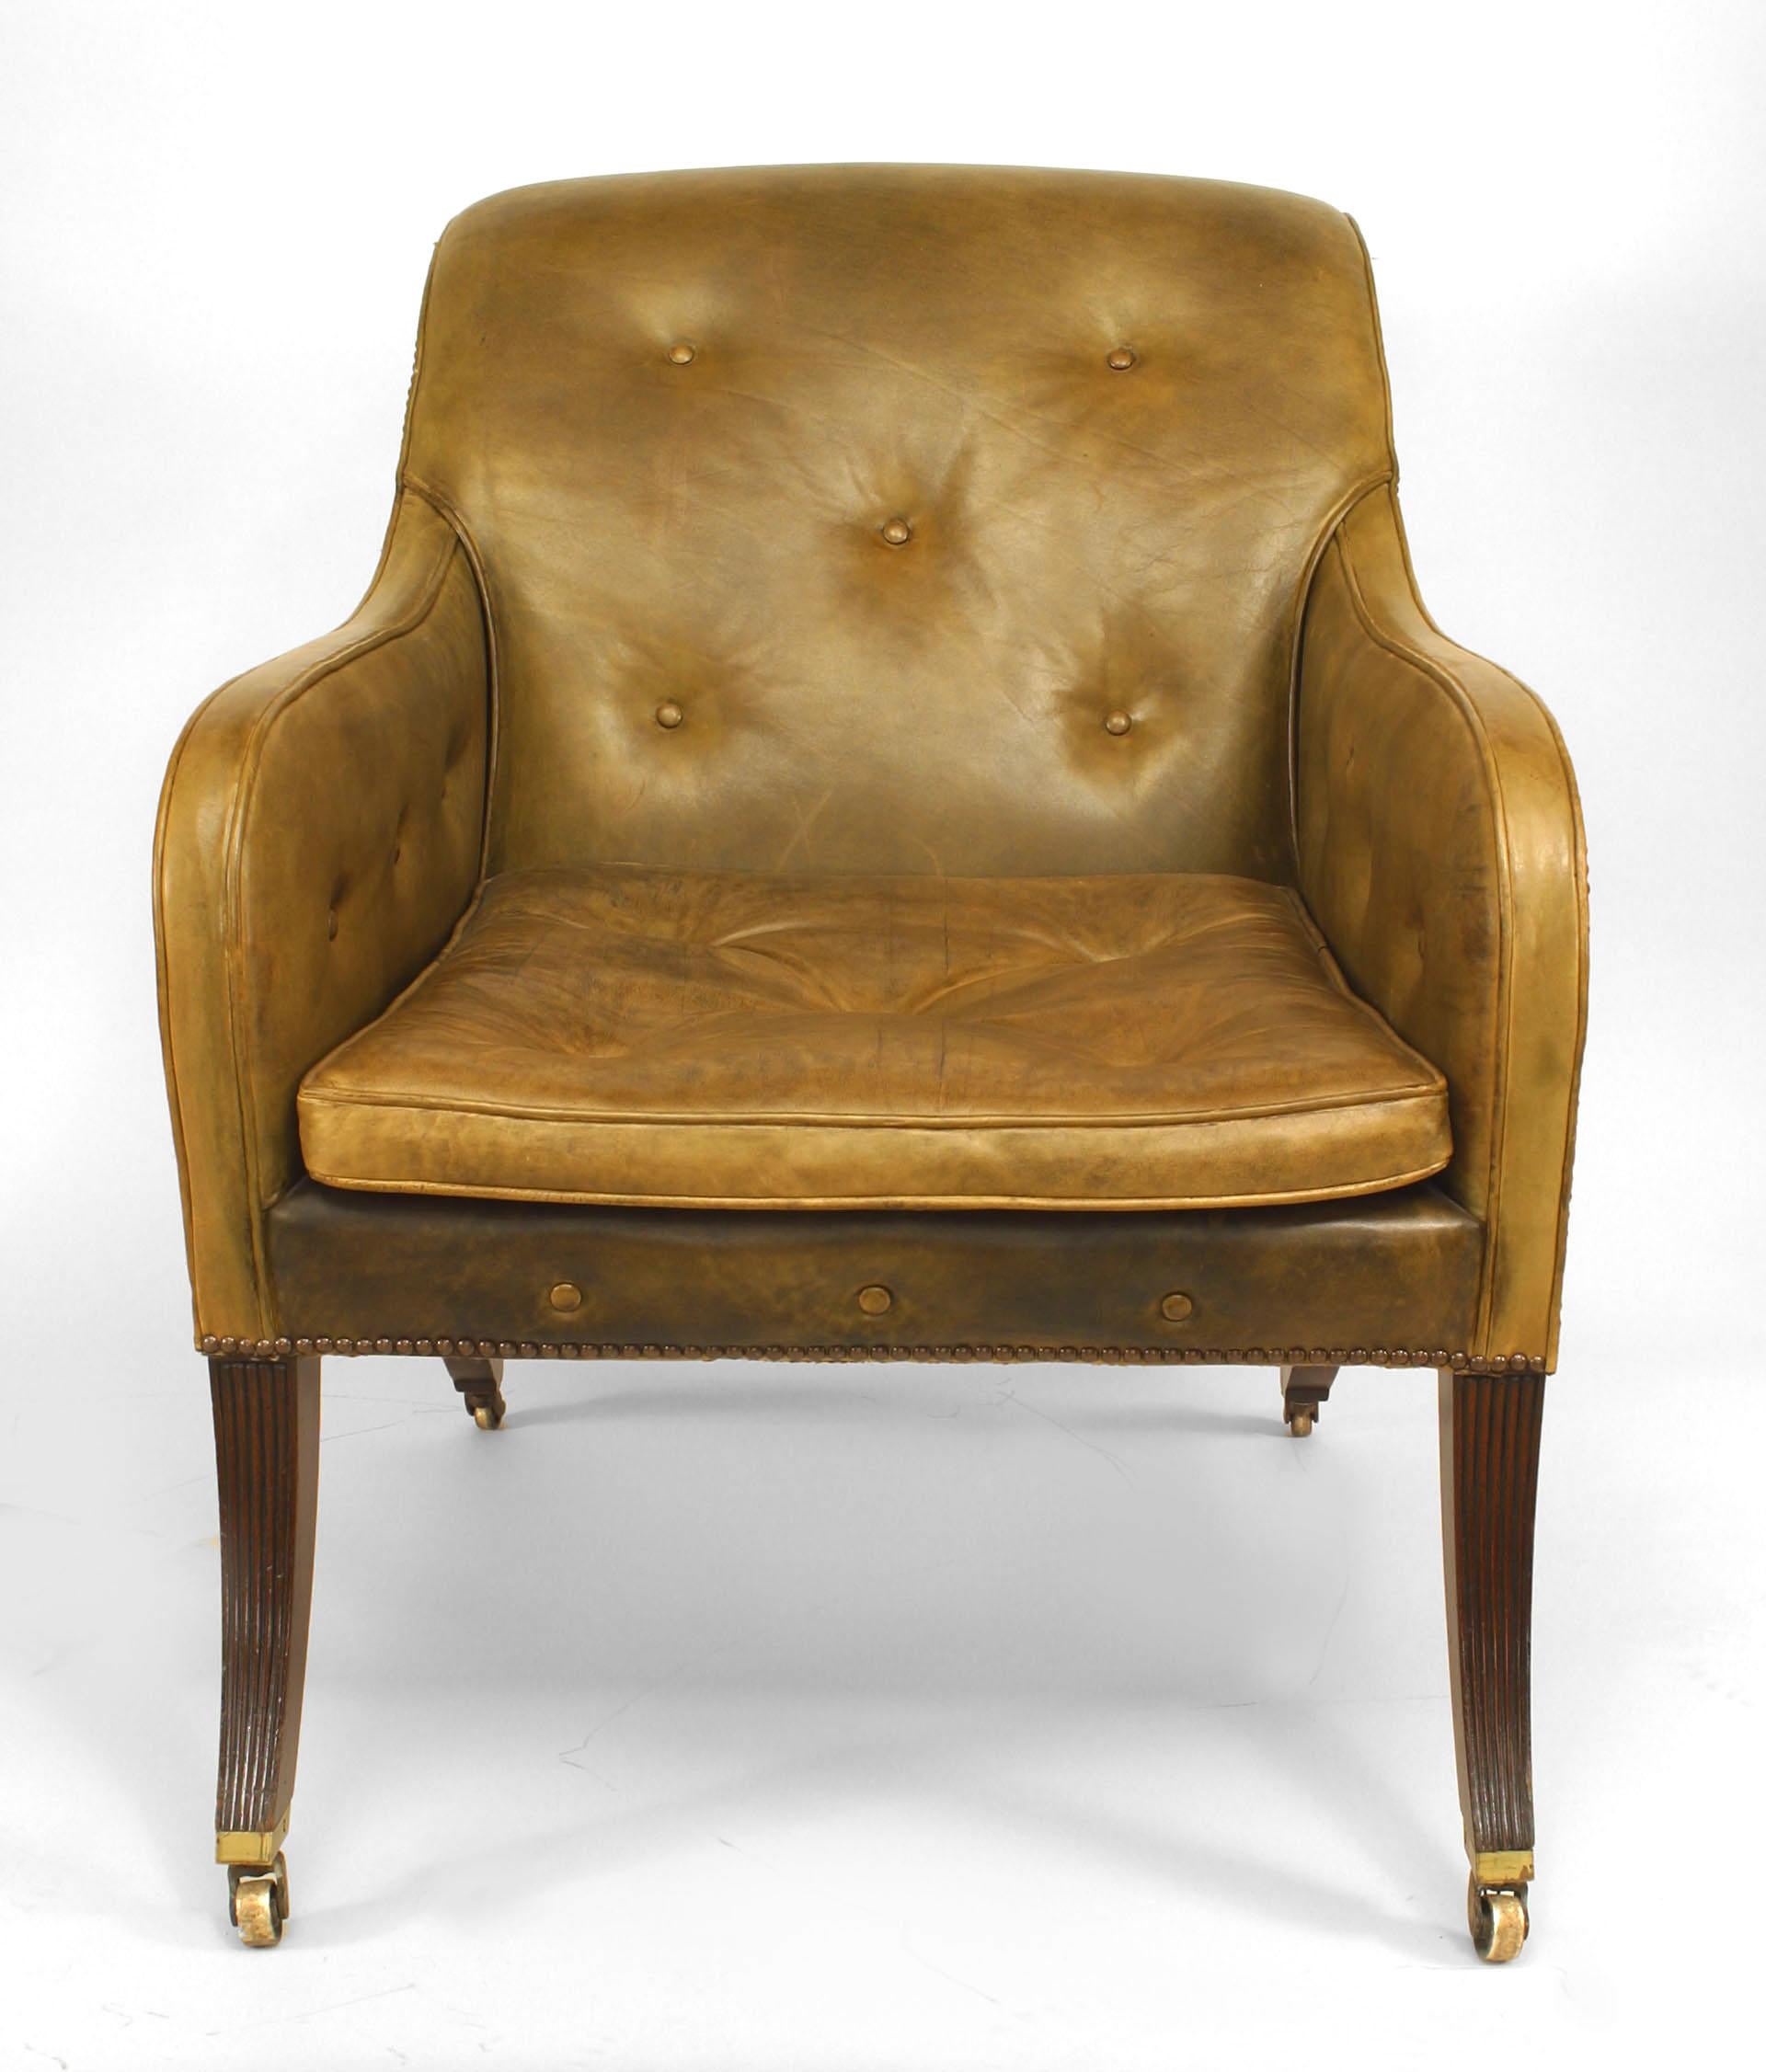 English Regency style mahogany sleigh back club chair with green leather upholstery, (20th century).